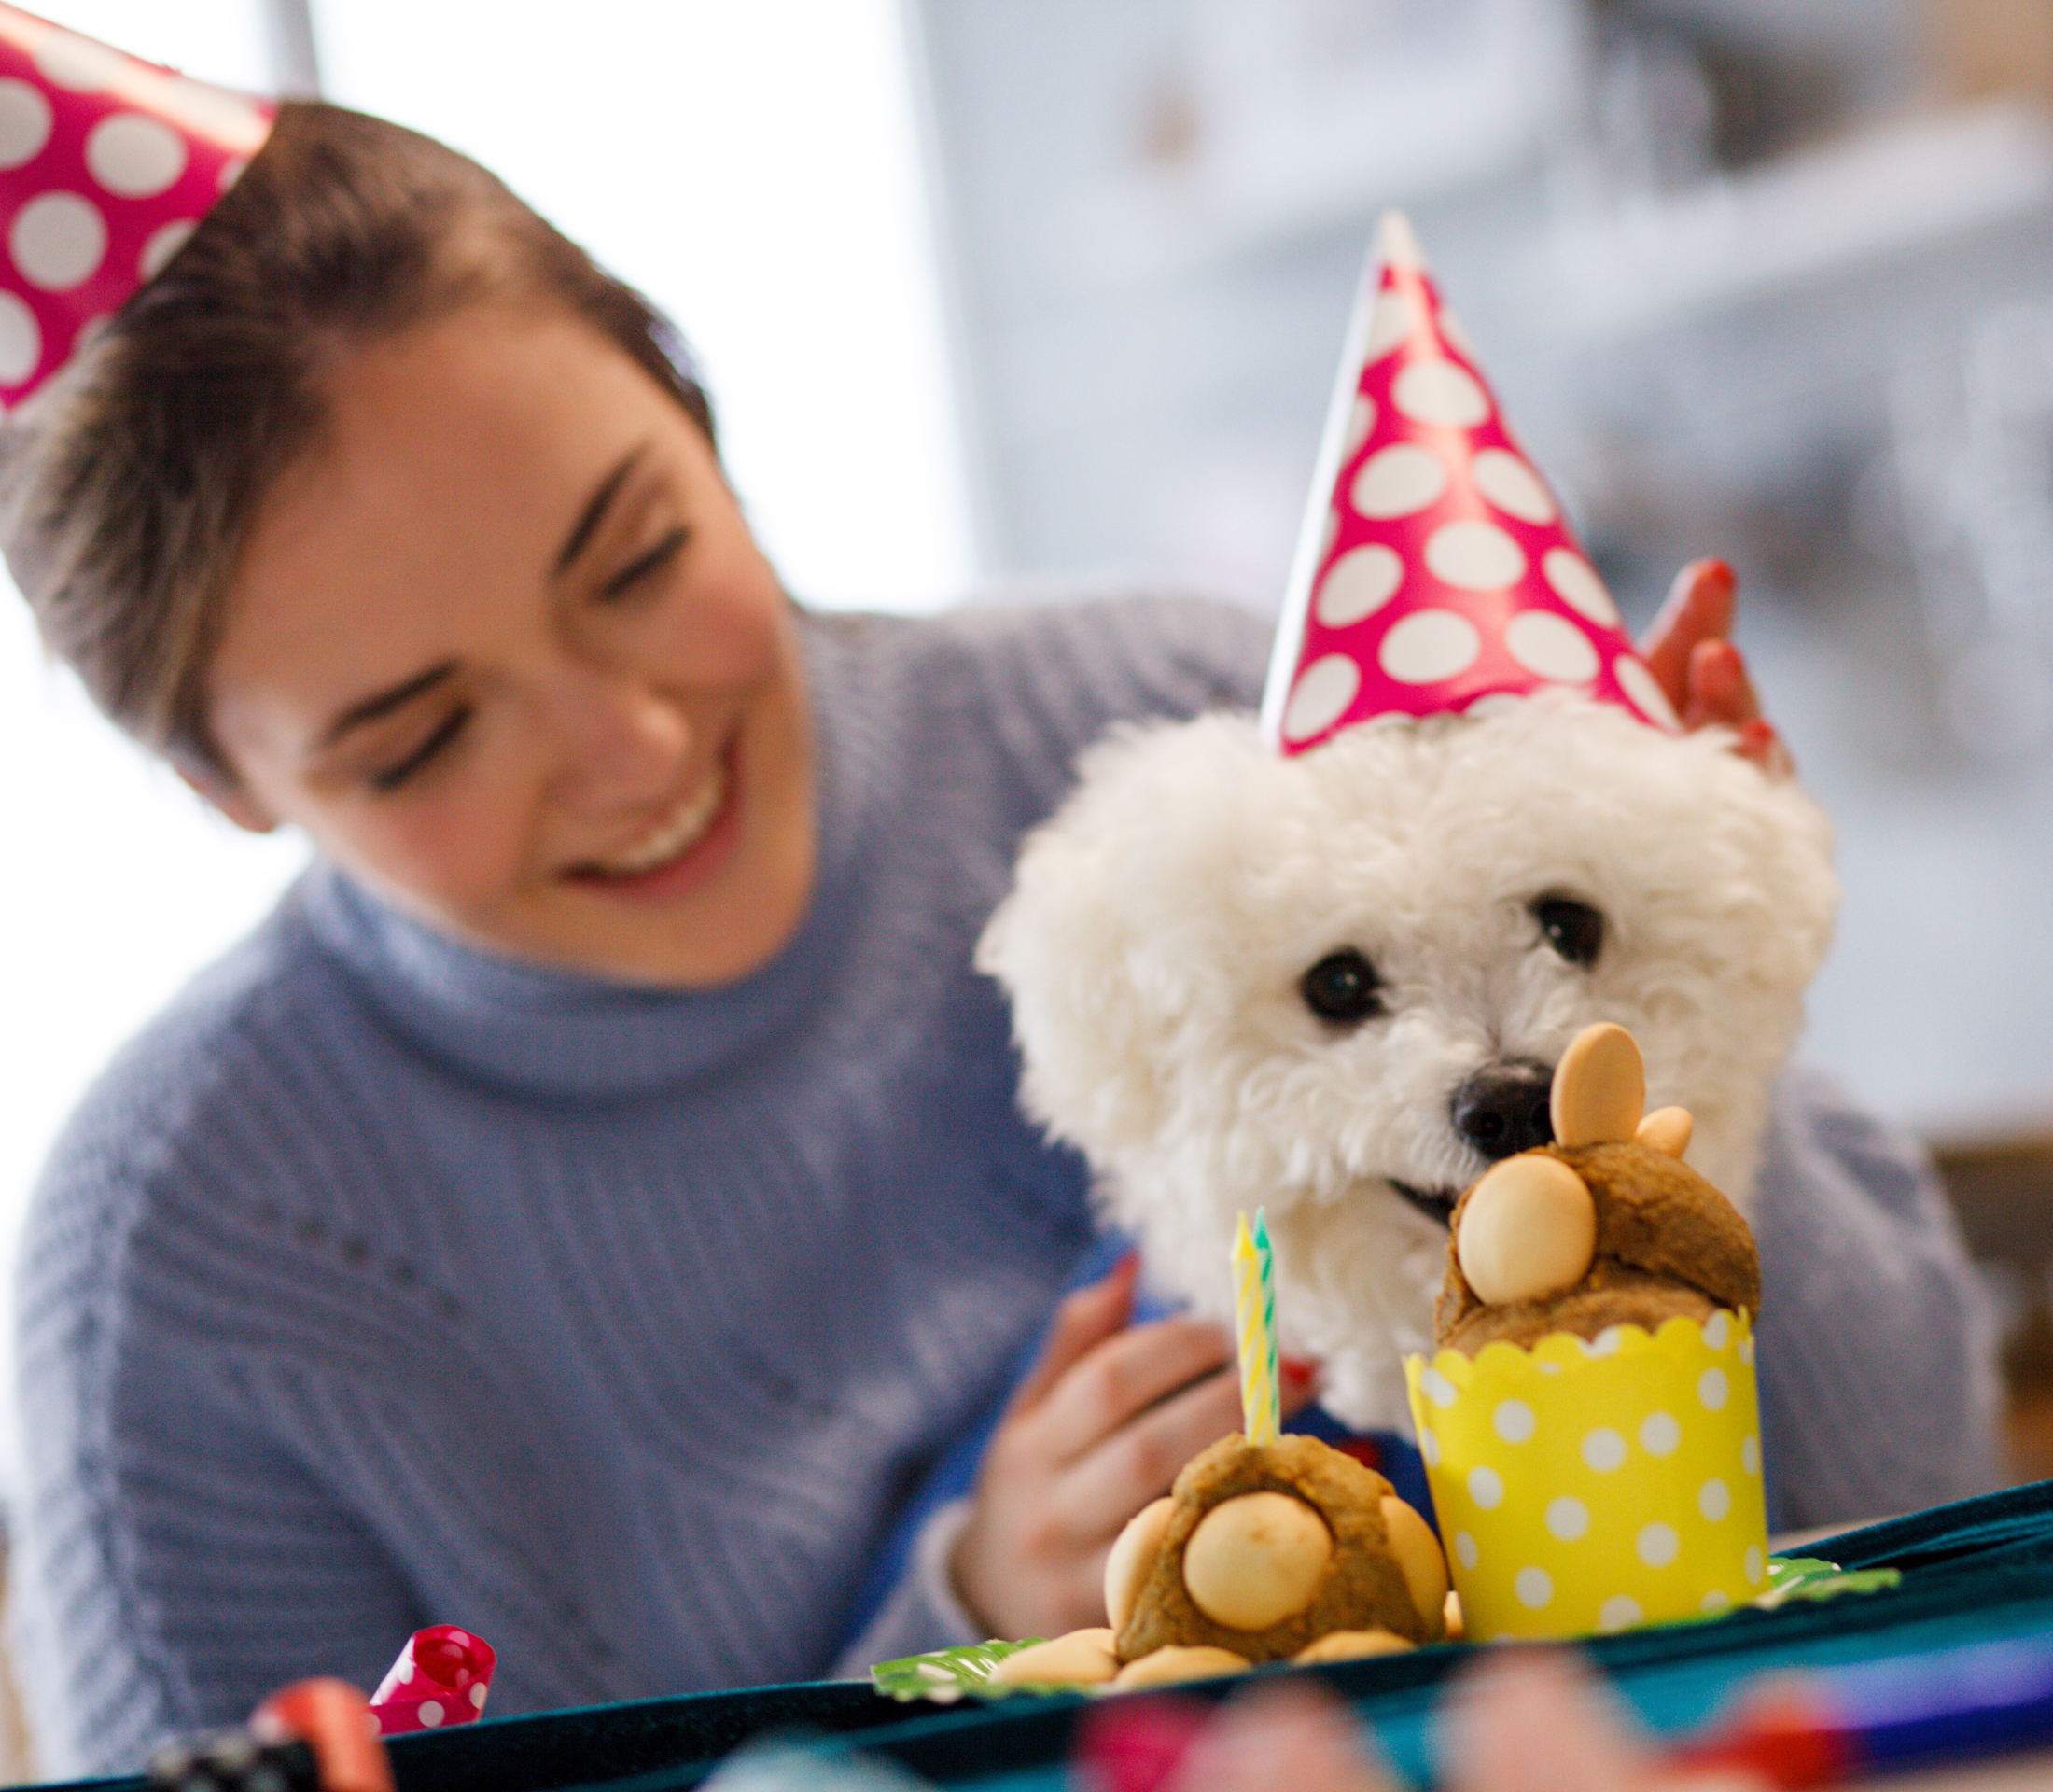 White Terrier with a polka dot party hat and a yellow cake with lady in blue shirt